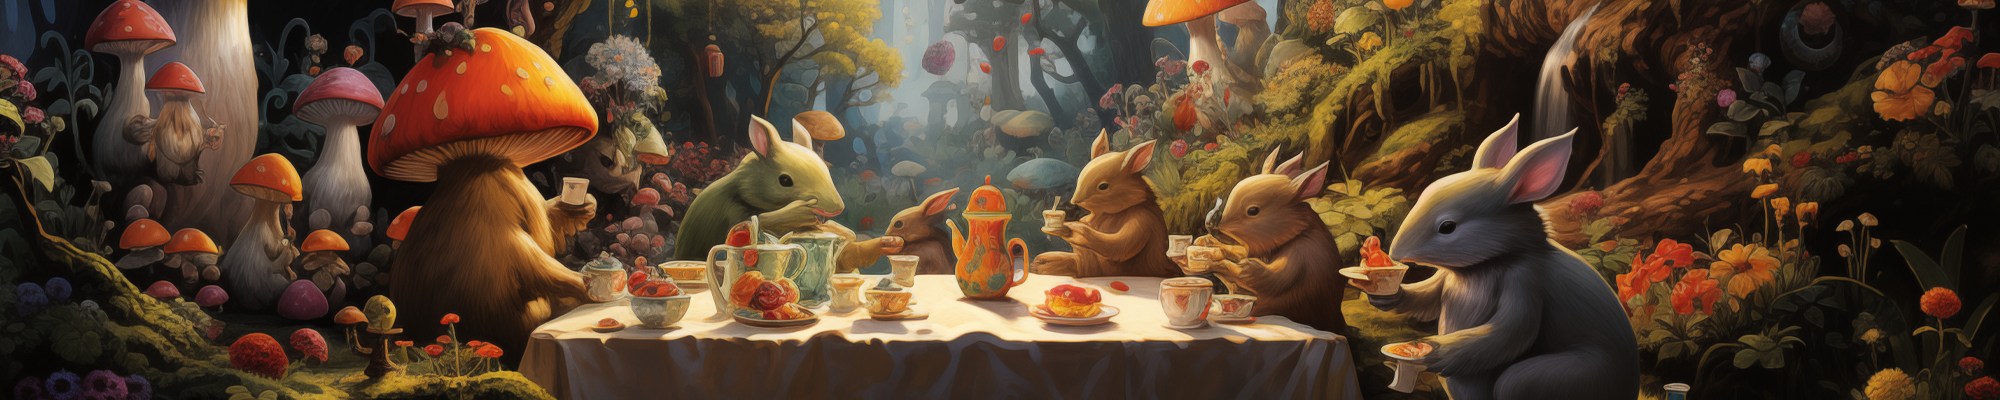 forest plants and animals at tea party